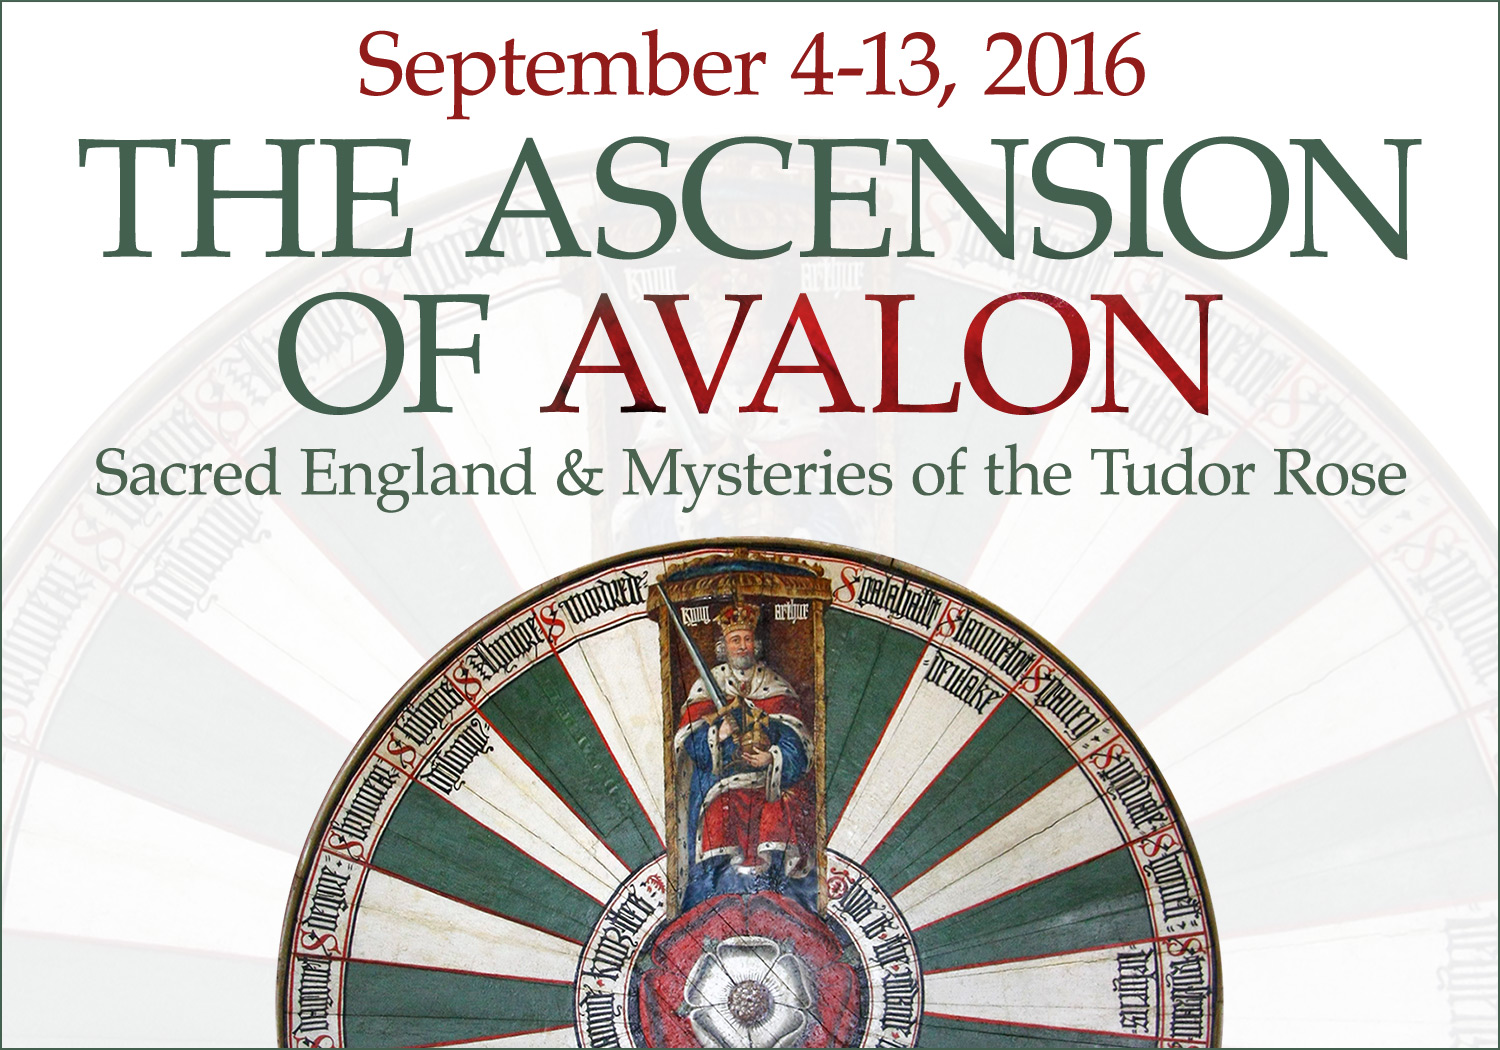 The Ascension of Avalon